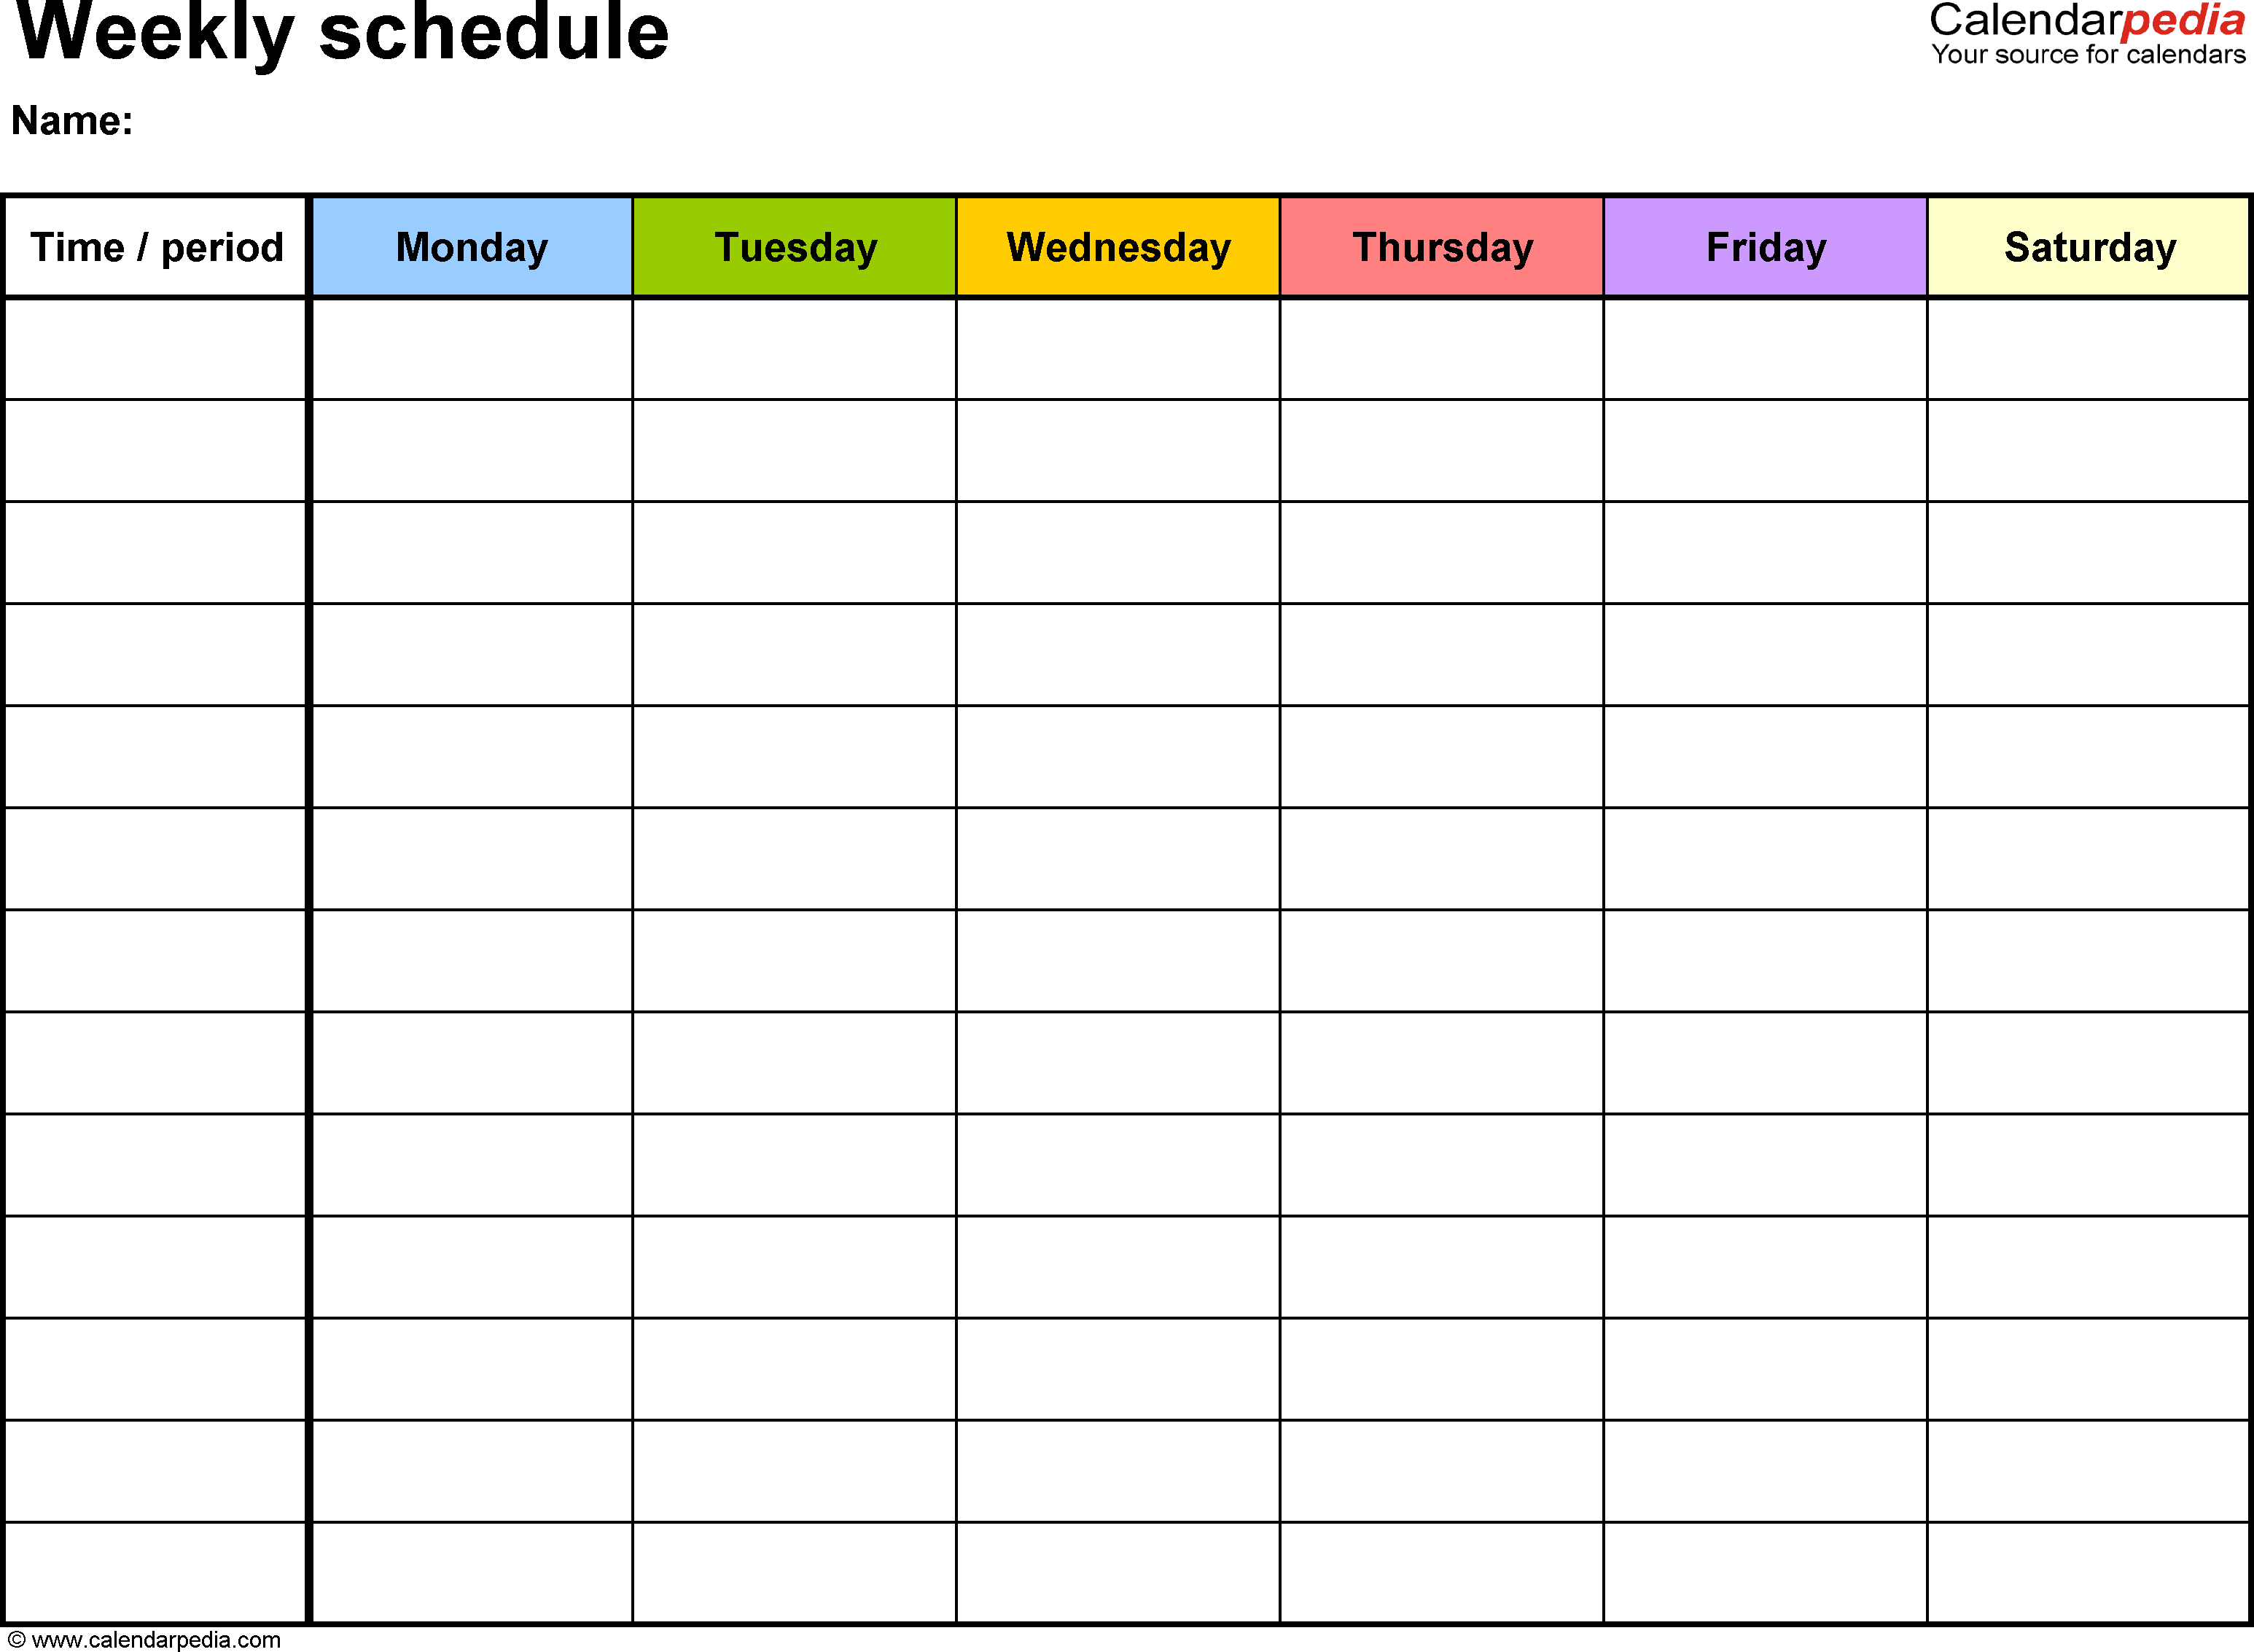 Weekly+Schedule+Template | Weekly Calendar Template pertaining to Free Weekly Calendar With Time Slots